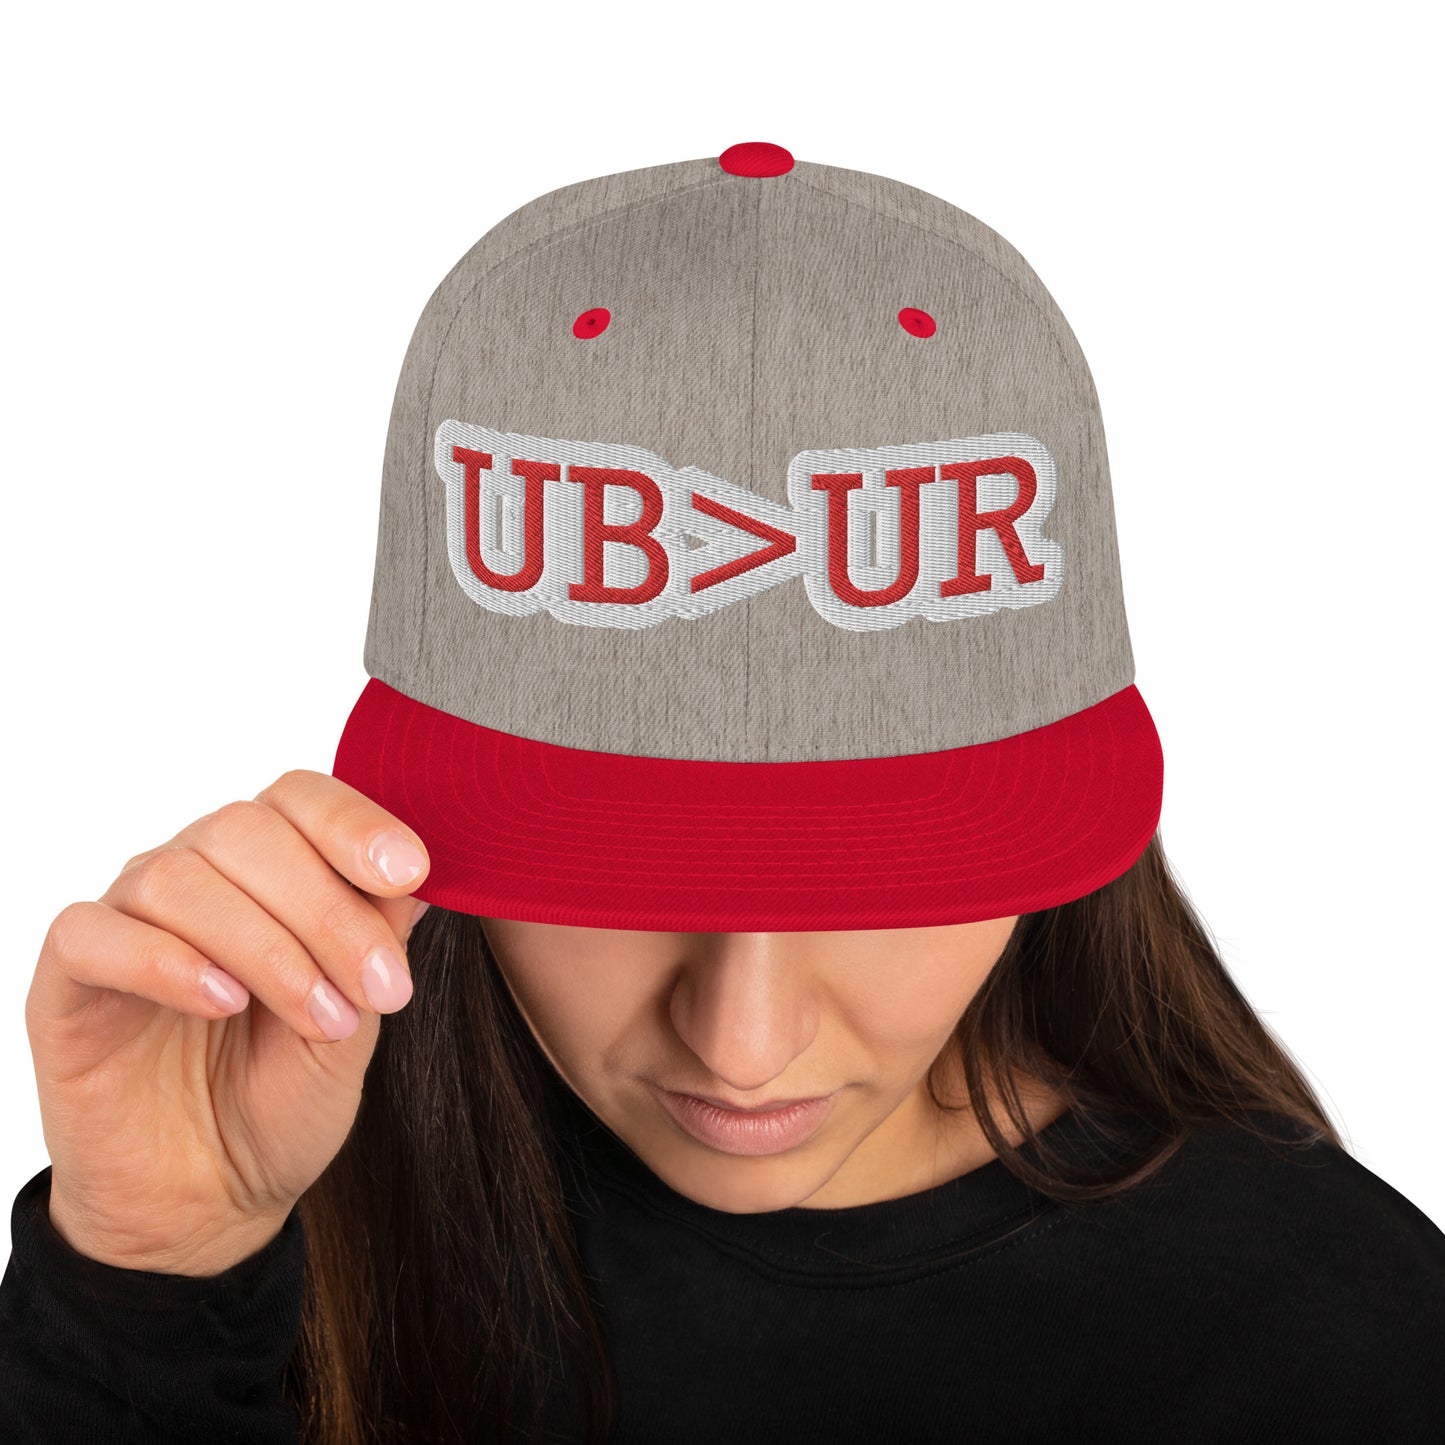 UBUR-Snapback Hat, white and red letters